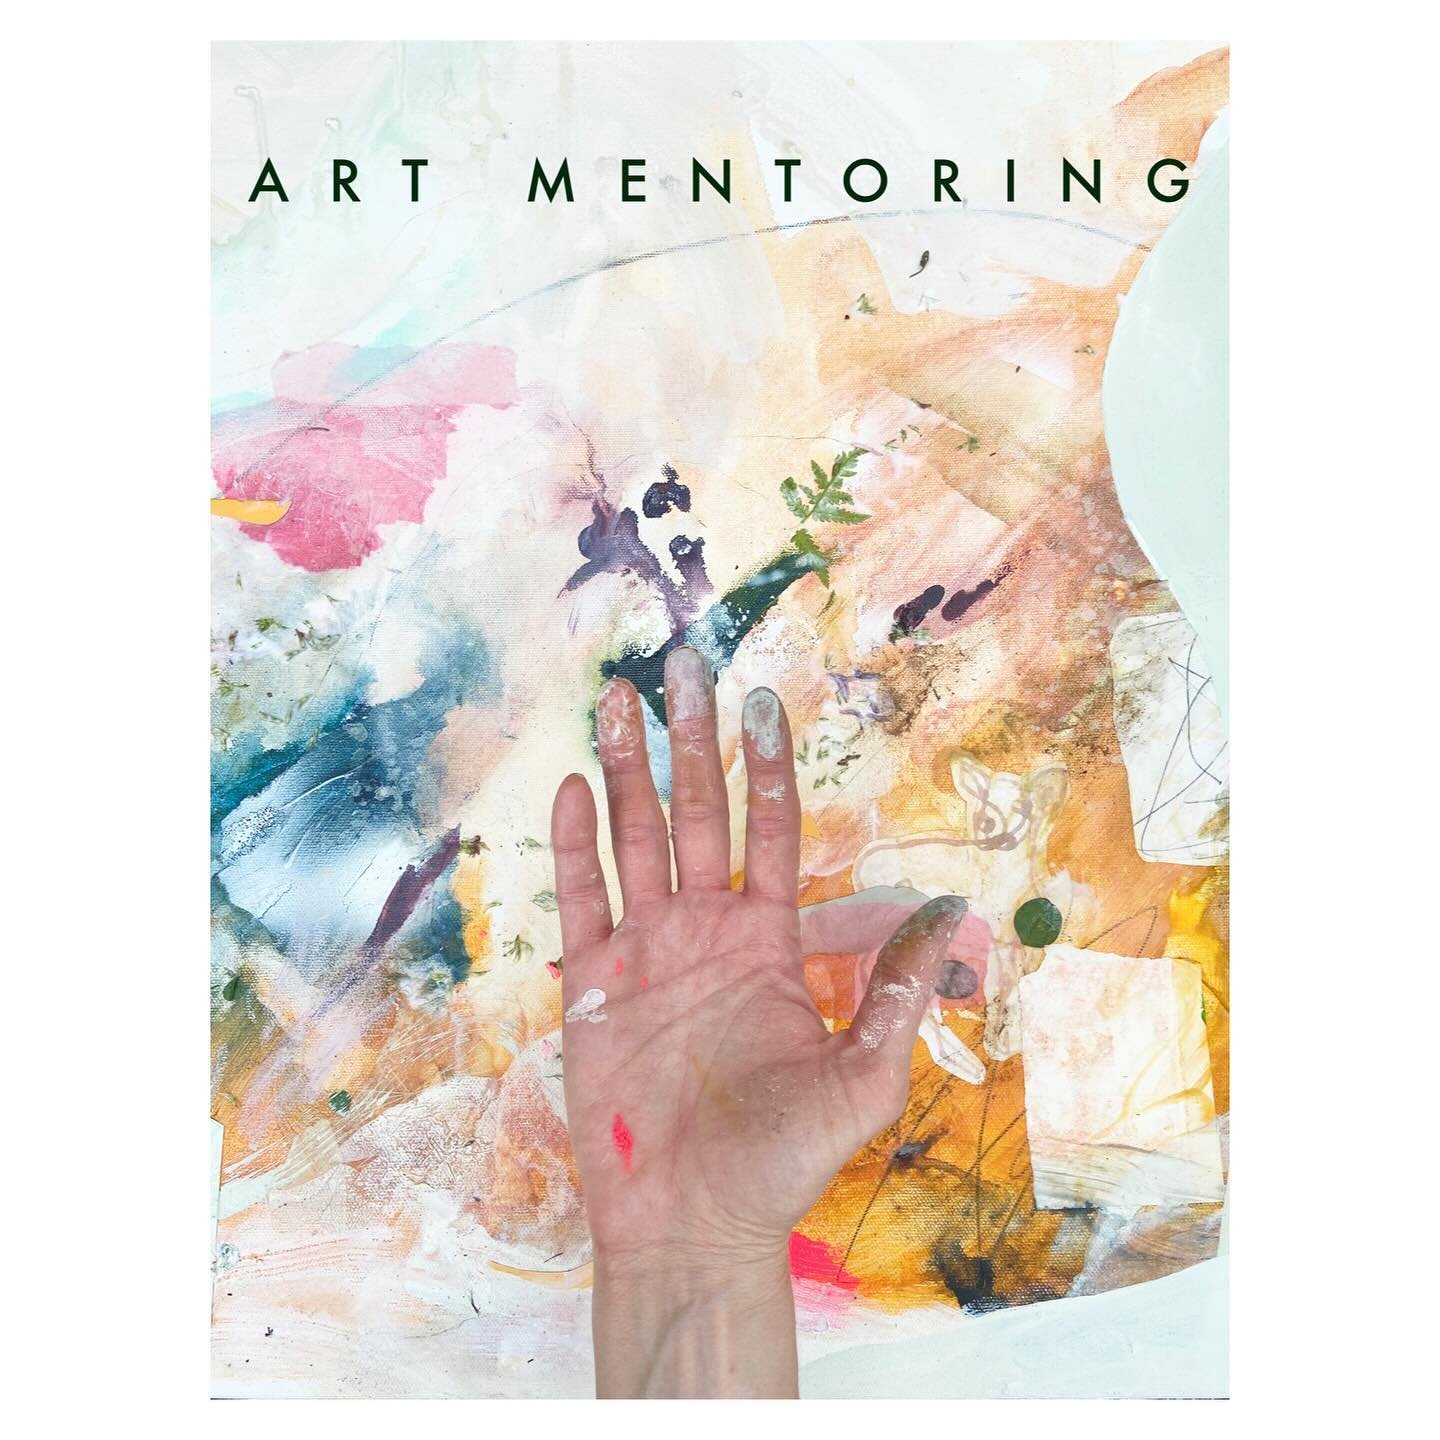 With a background in Art Education and a future in Art Therapy (coupled with my own active studio practice), Art Mentoring is an ideal intersection for this season of my life. I love offering guidance, perspectives, feedback, accountability, and conn